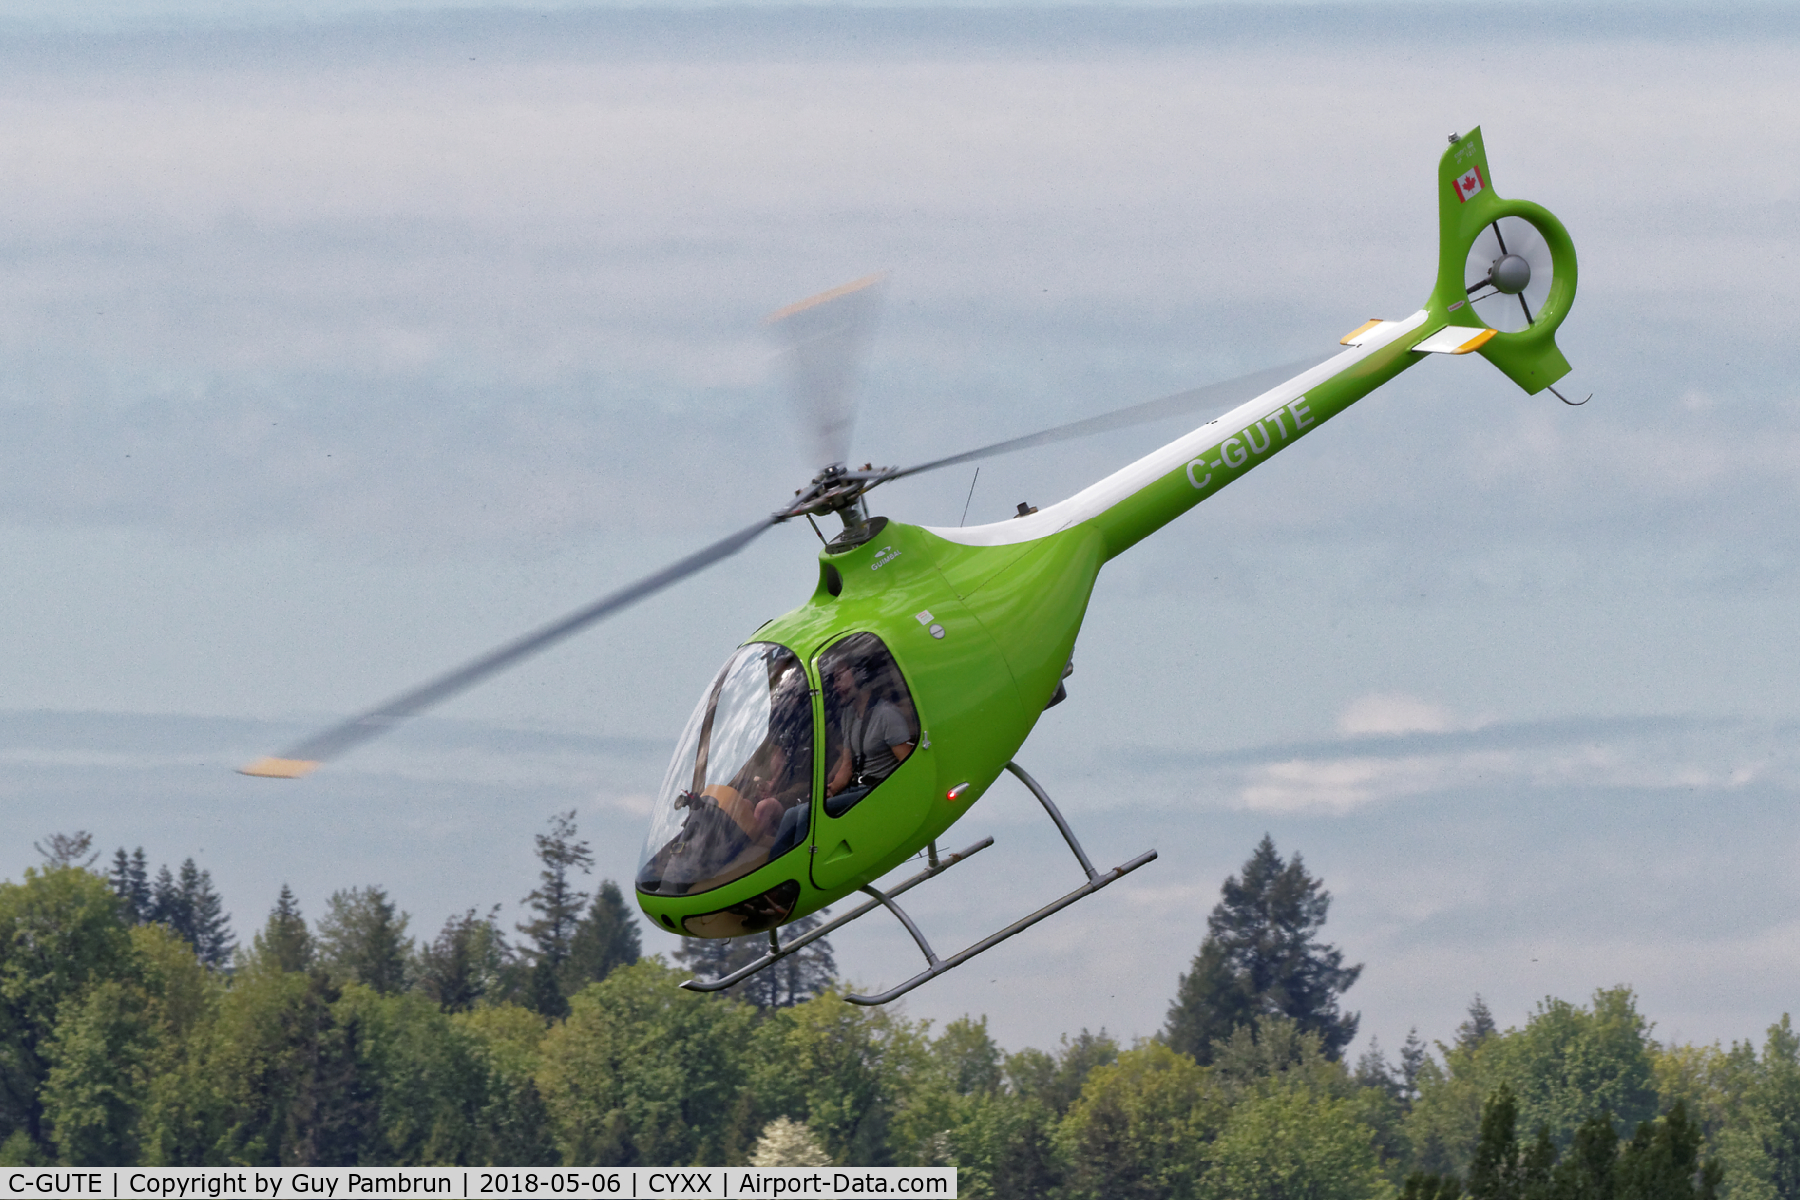 C-GUTE, 2017 Guimbal Cabri G2 C/N 1211, At the practice area well north of the Abbotsford airport.